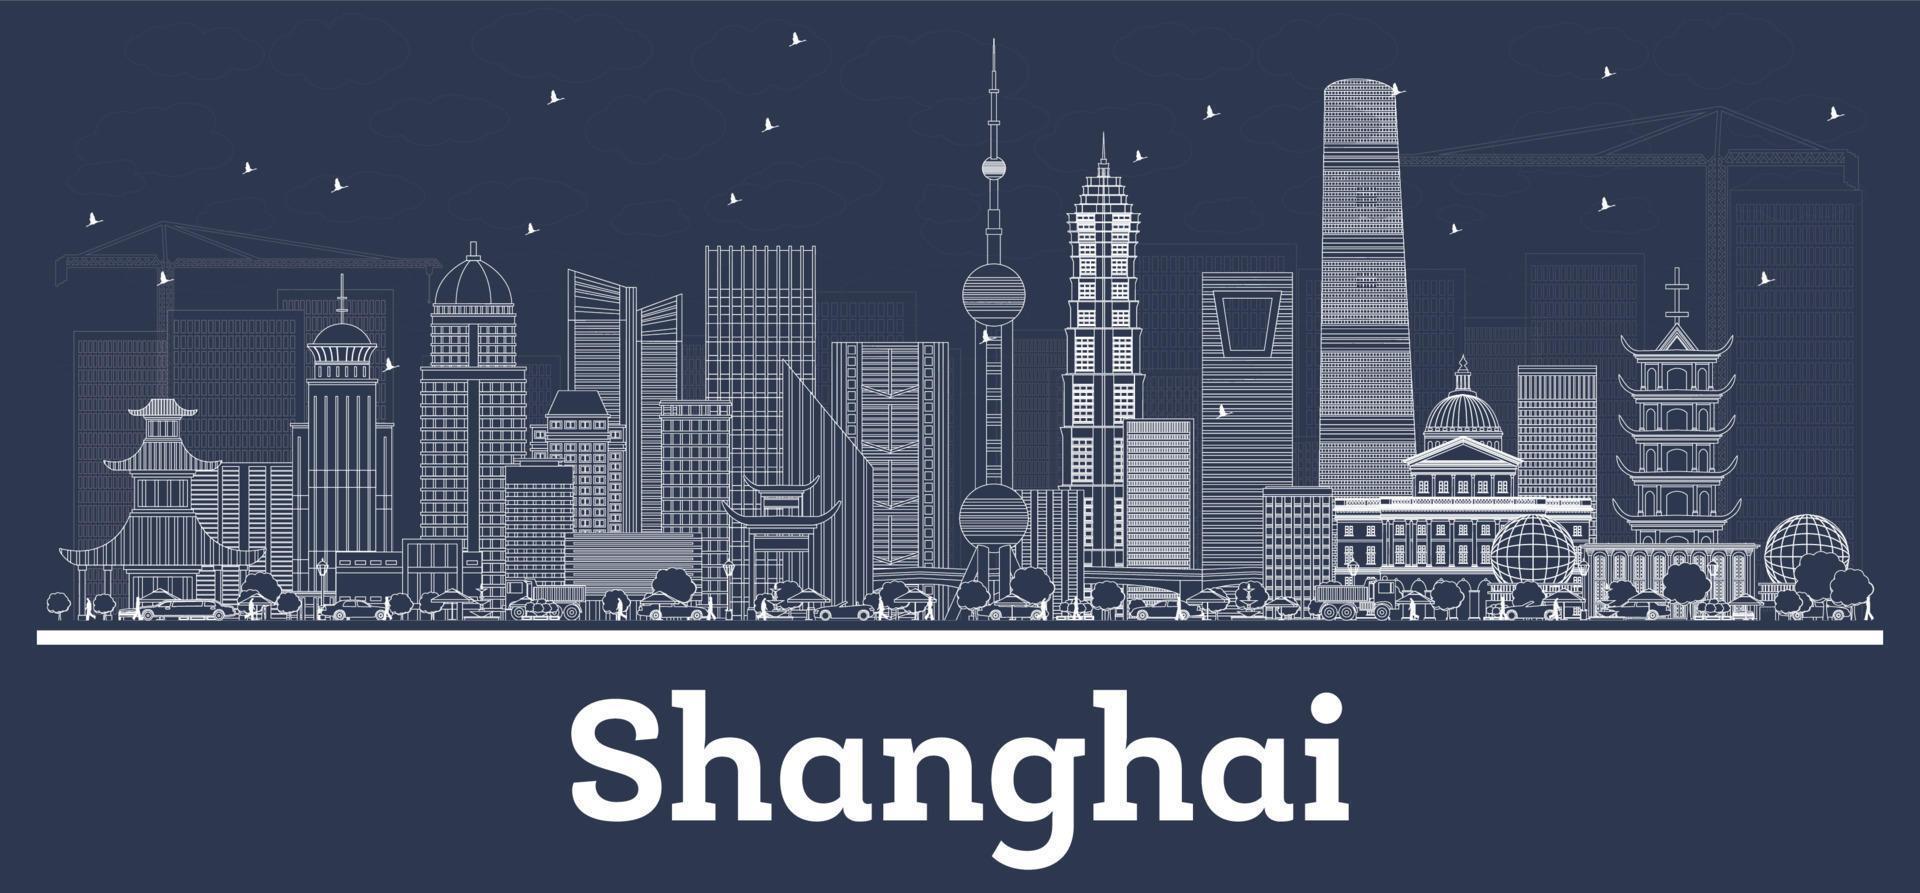 Outline Shanghai China City Skyline with White Buildings. vector